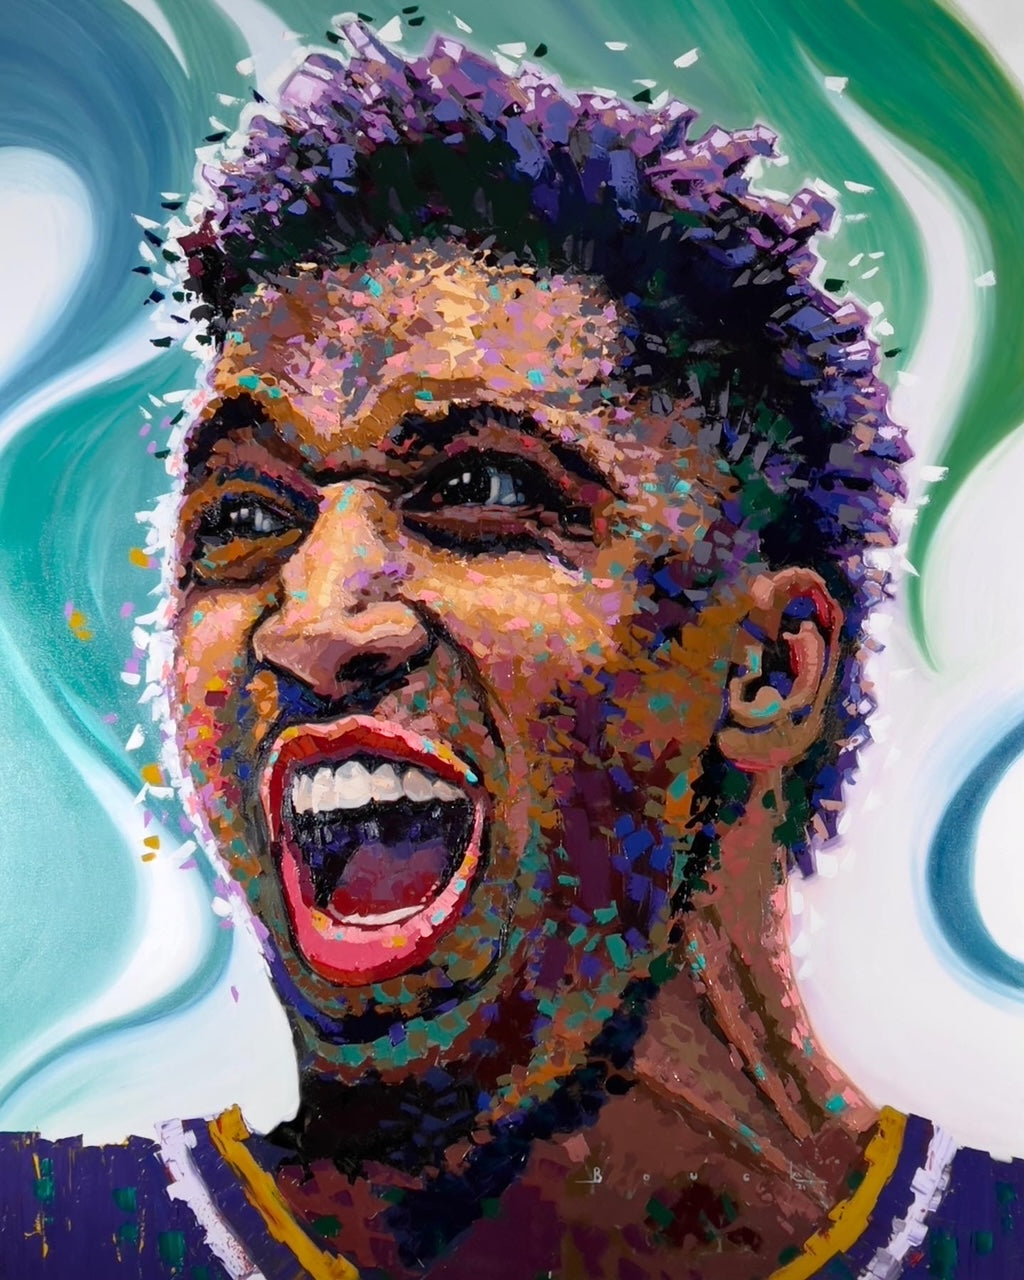 Digital painting of NBA player Donovan Mitchell with a purple and green background and confetti-like details on his hair.